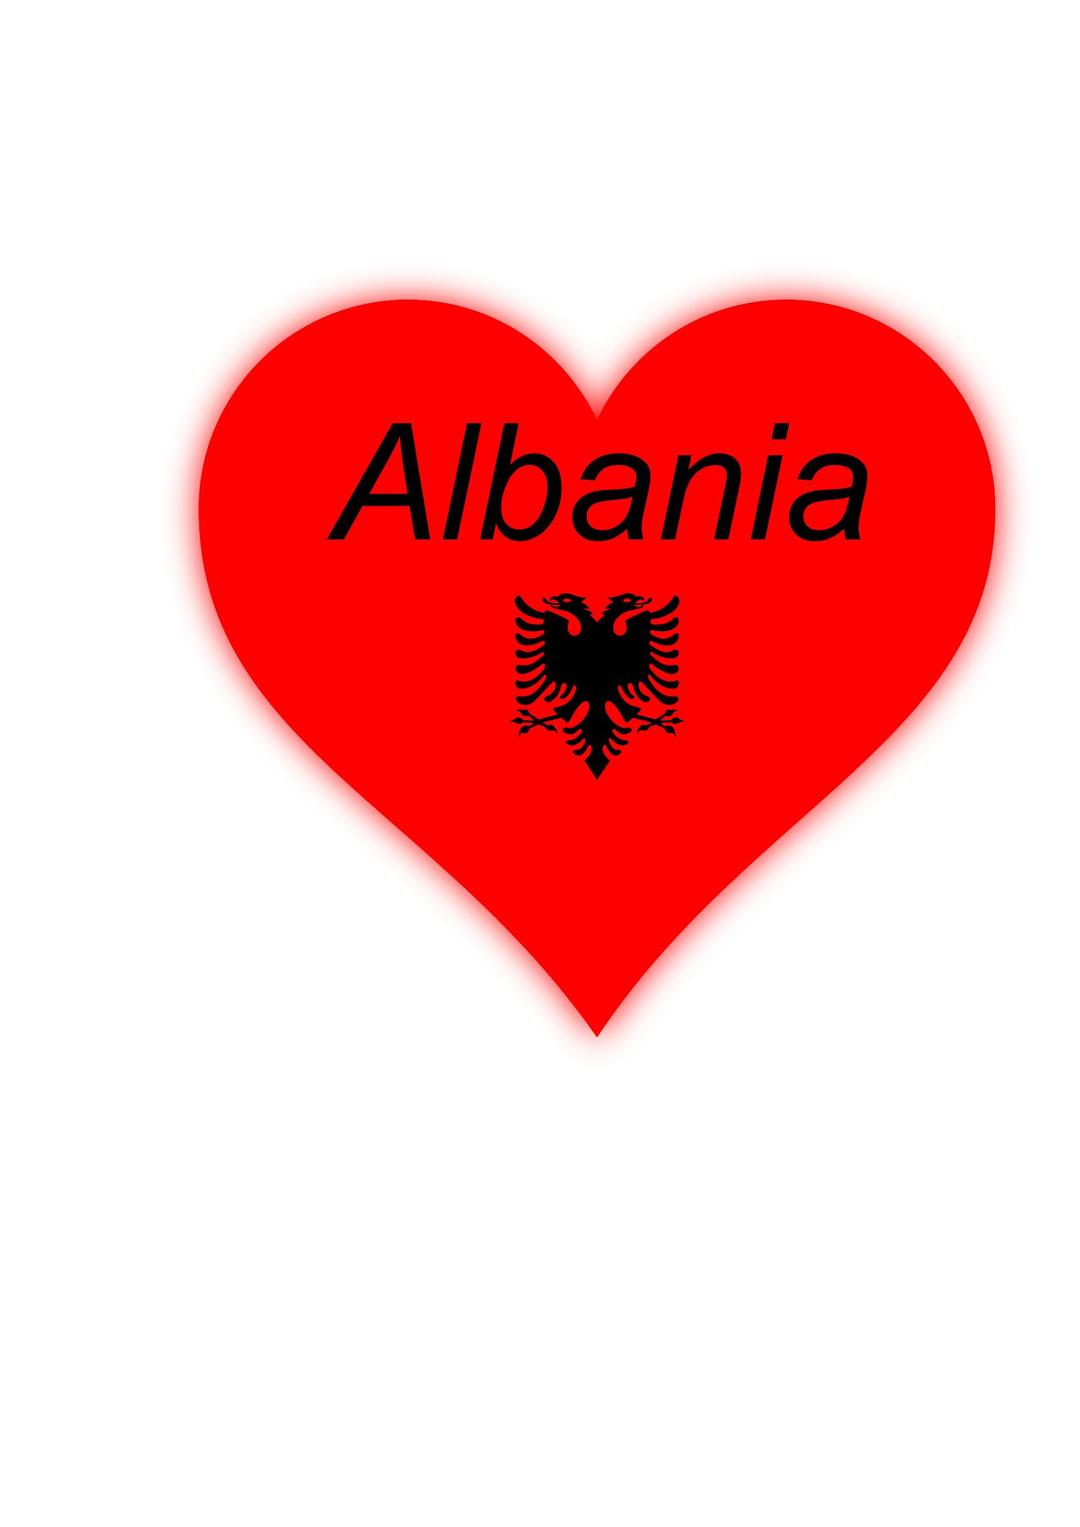 Albania my heart png transparent